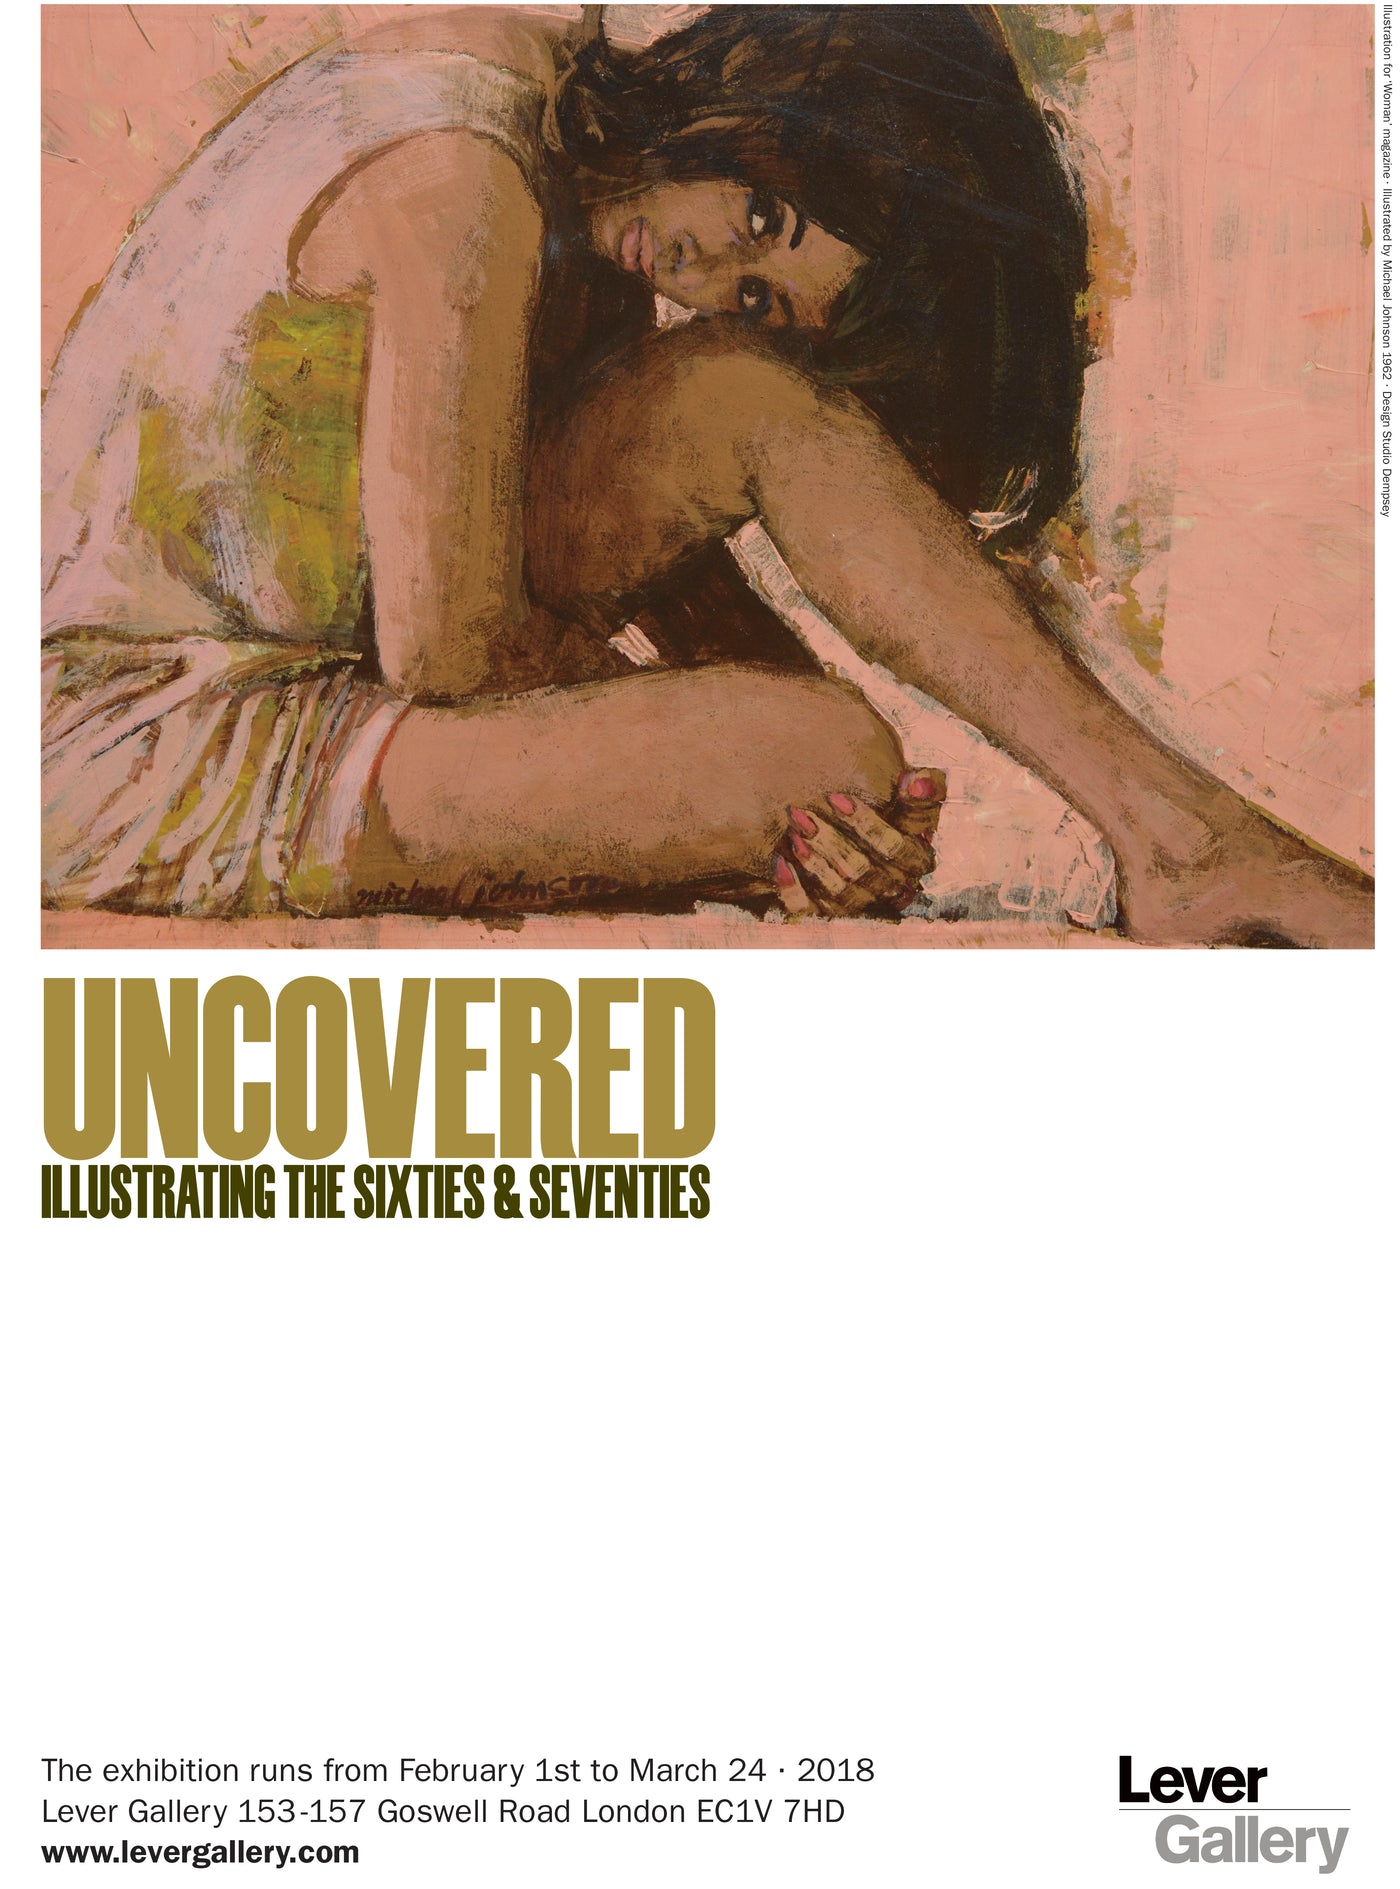 UNCOVERED: Illustrating the Sixties and Seventies